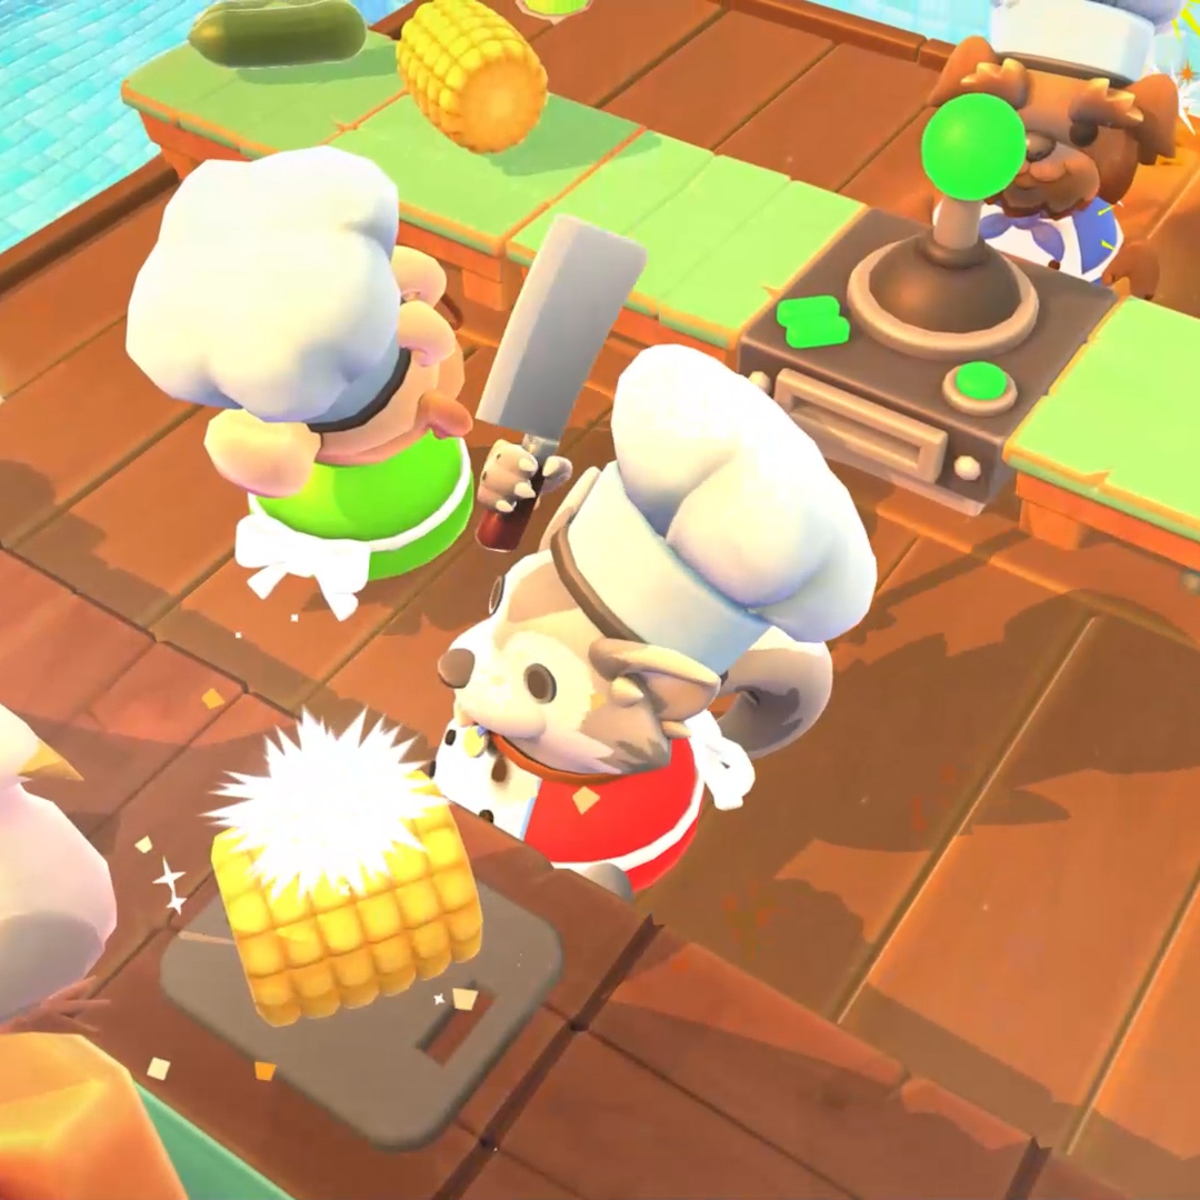 Overcooked 2 new seasonal DLC Suns's Out Buns Out hits PC on July 5